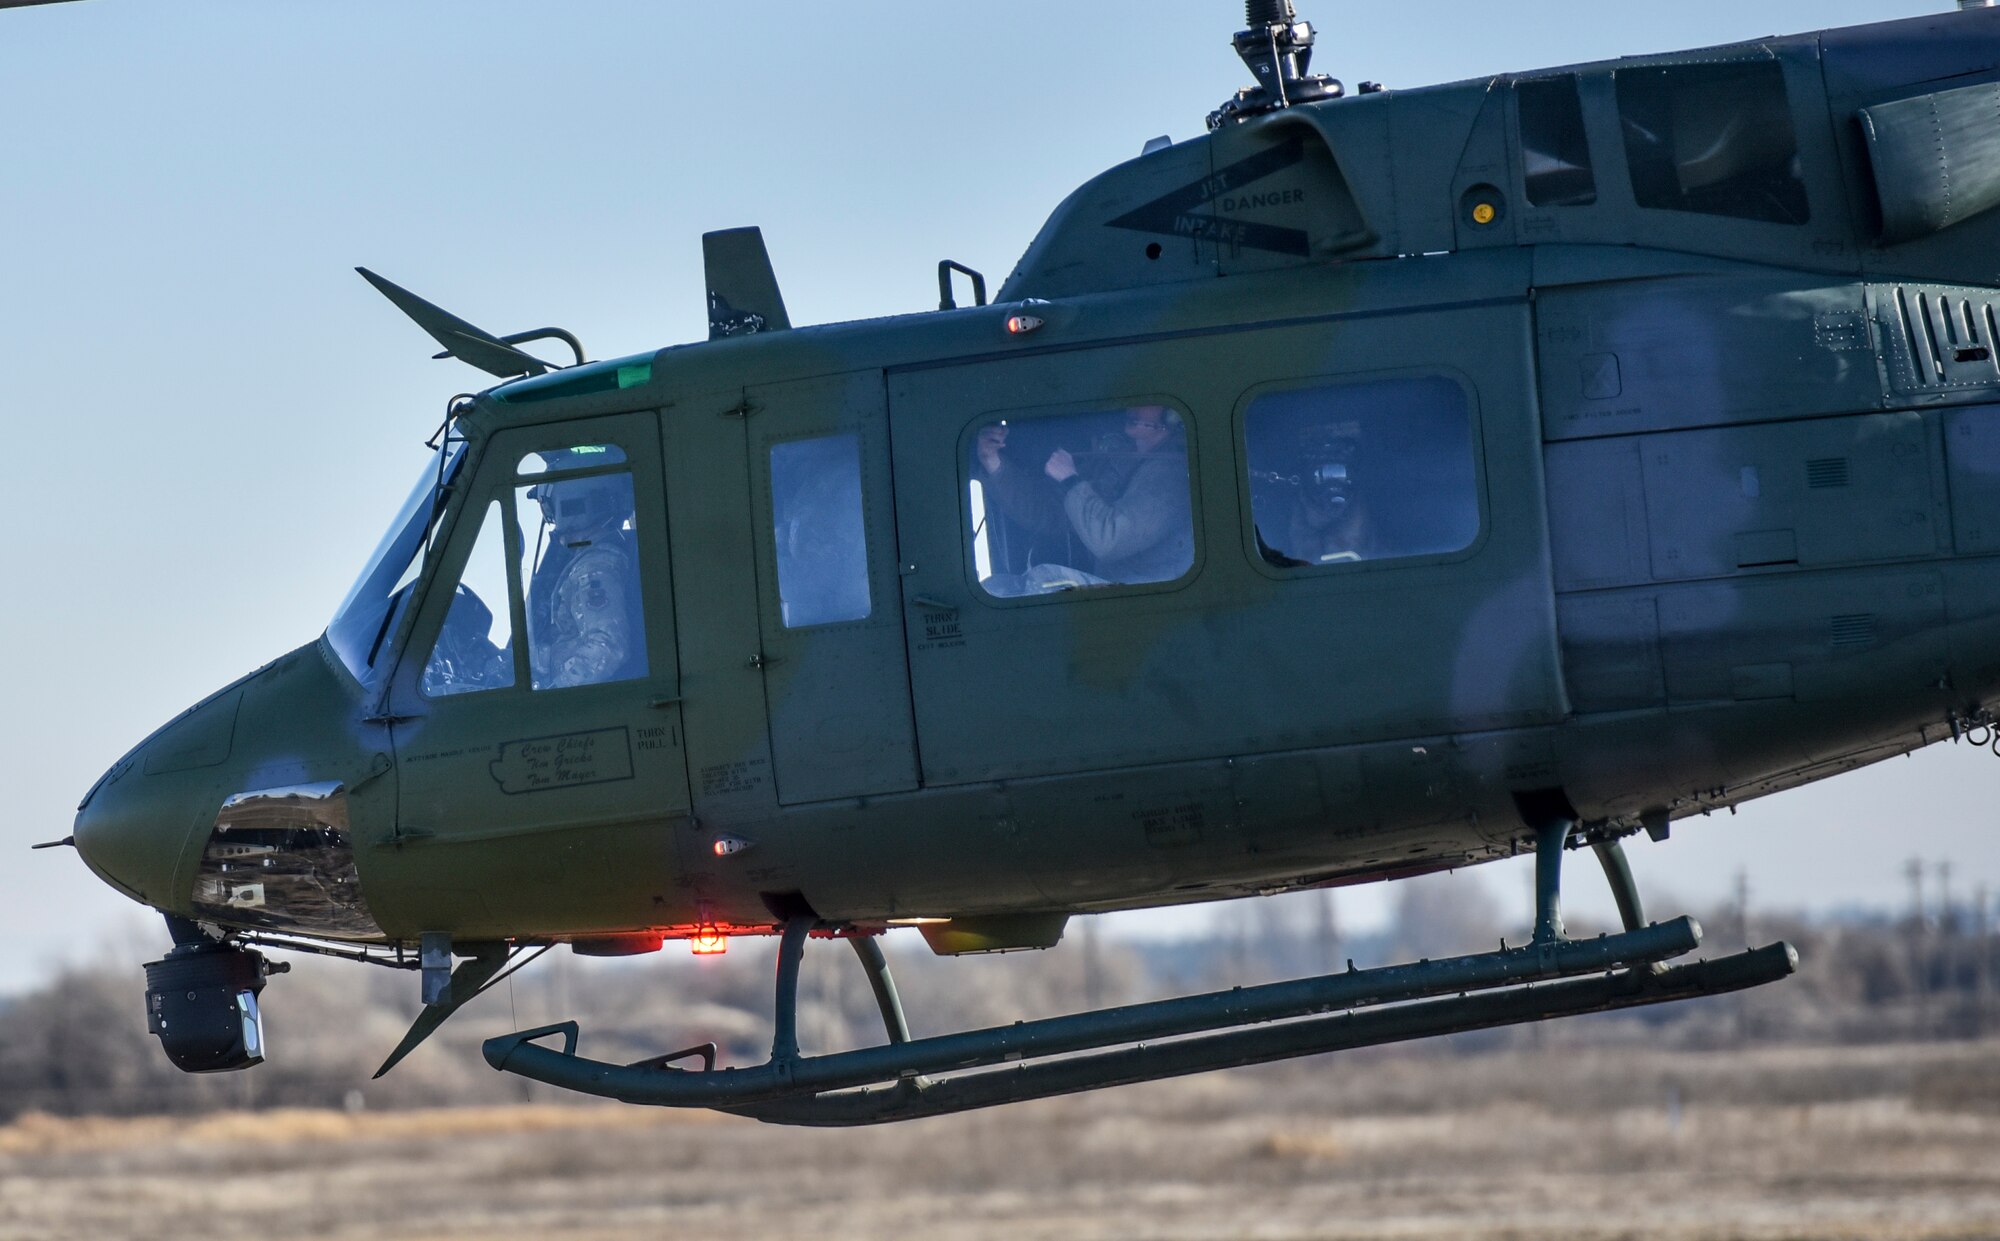 A 36th Rescue Squadron UH-1N Huey takes off during Military Working Dog training Nov. 21, 2019, at Fairchild Air Force Base, Washington.